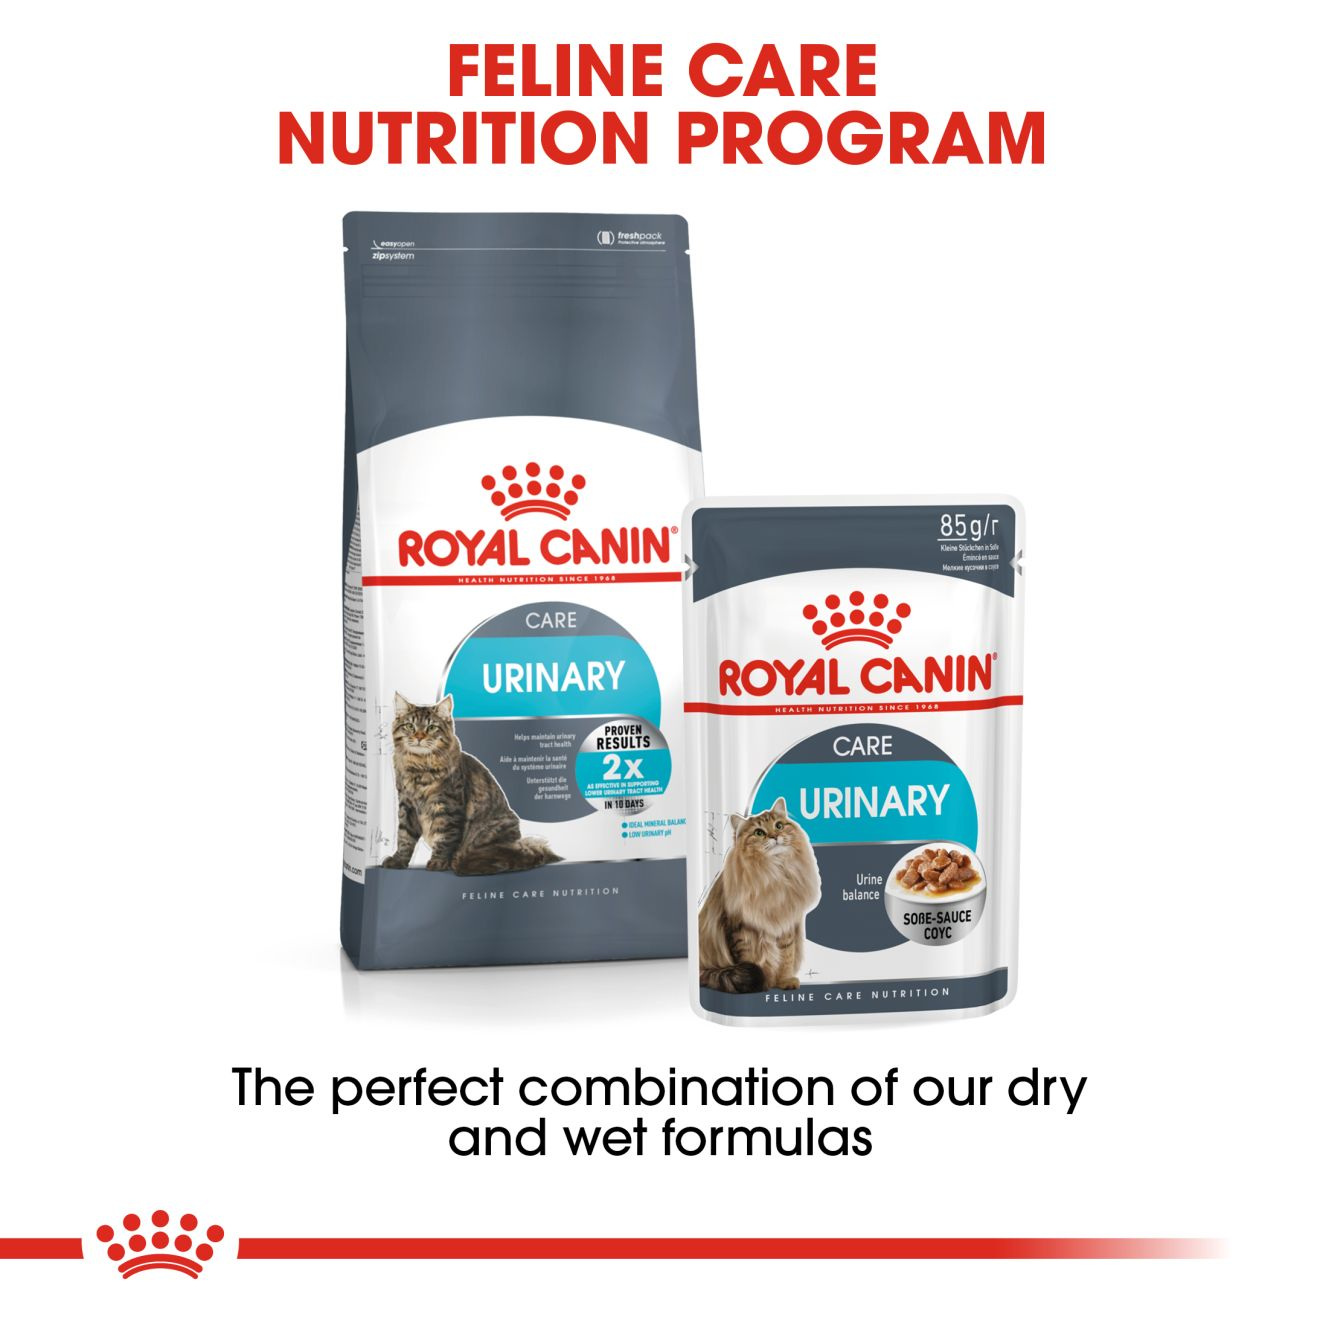 royal canin cat food for urinary problems